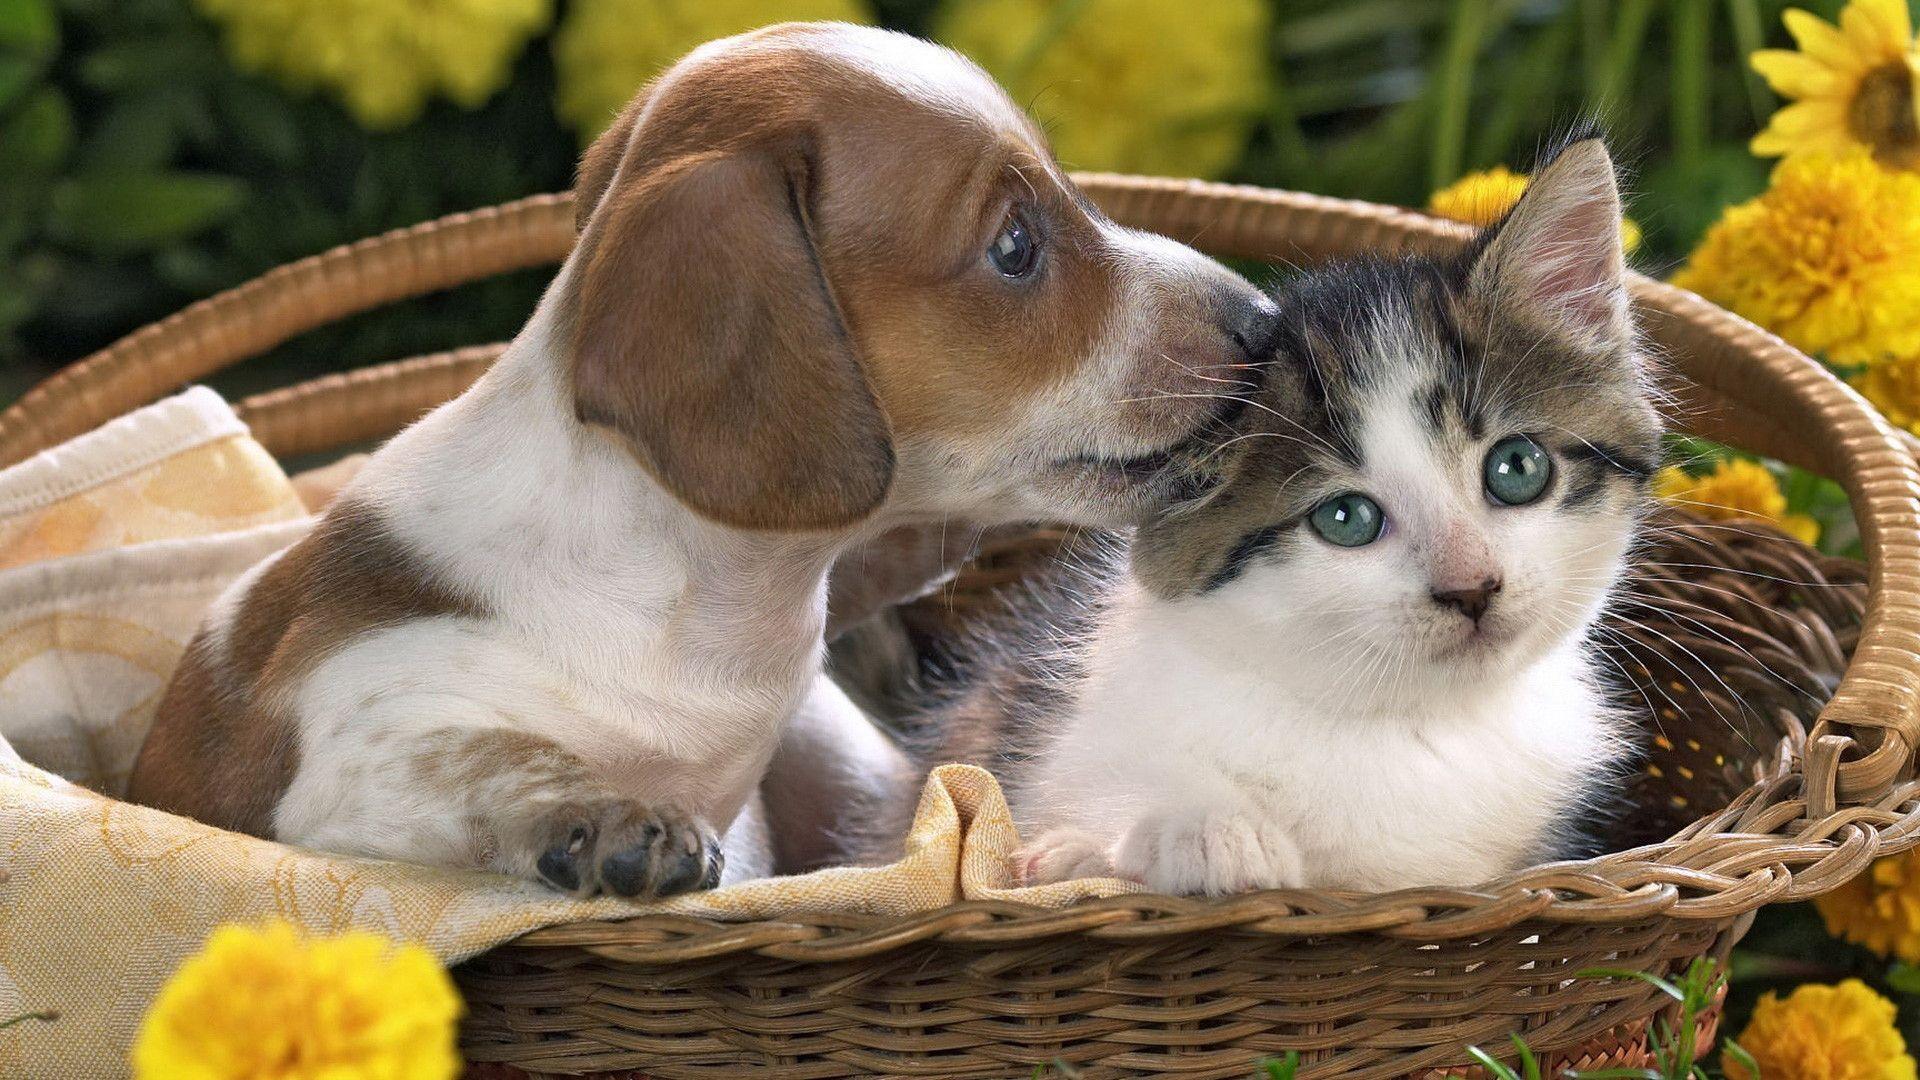 Cute Puppy And Kitten Wallpaper Image & Picture